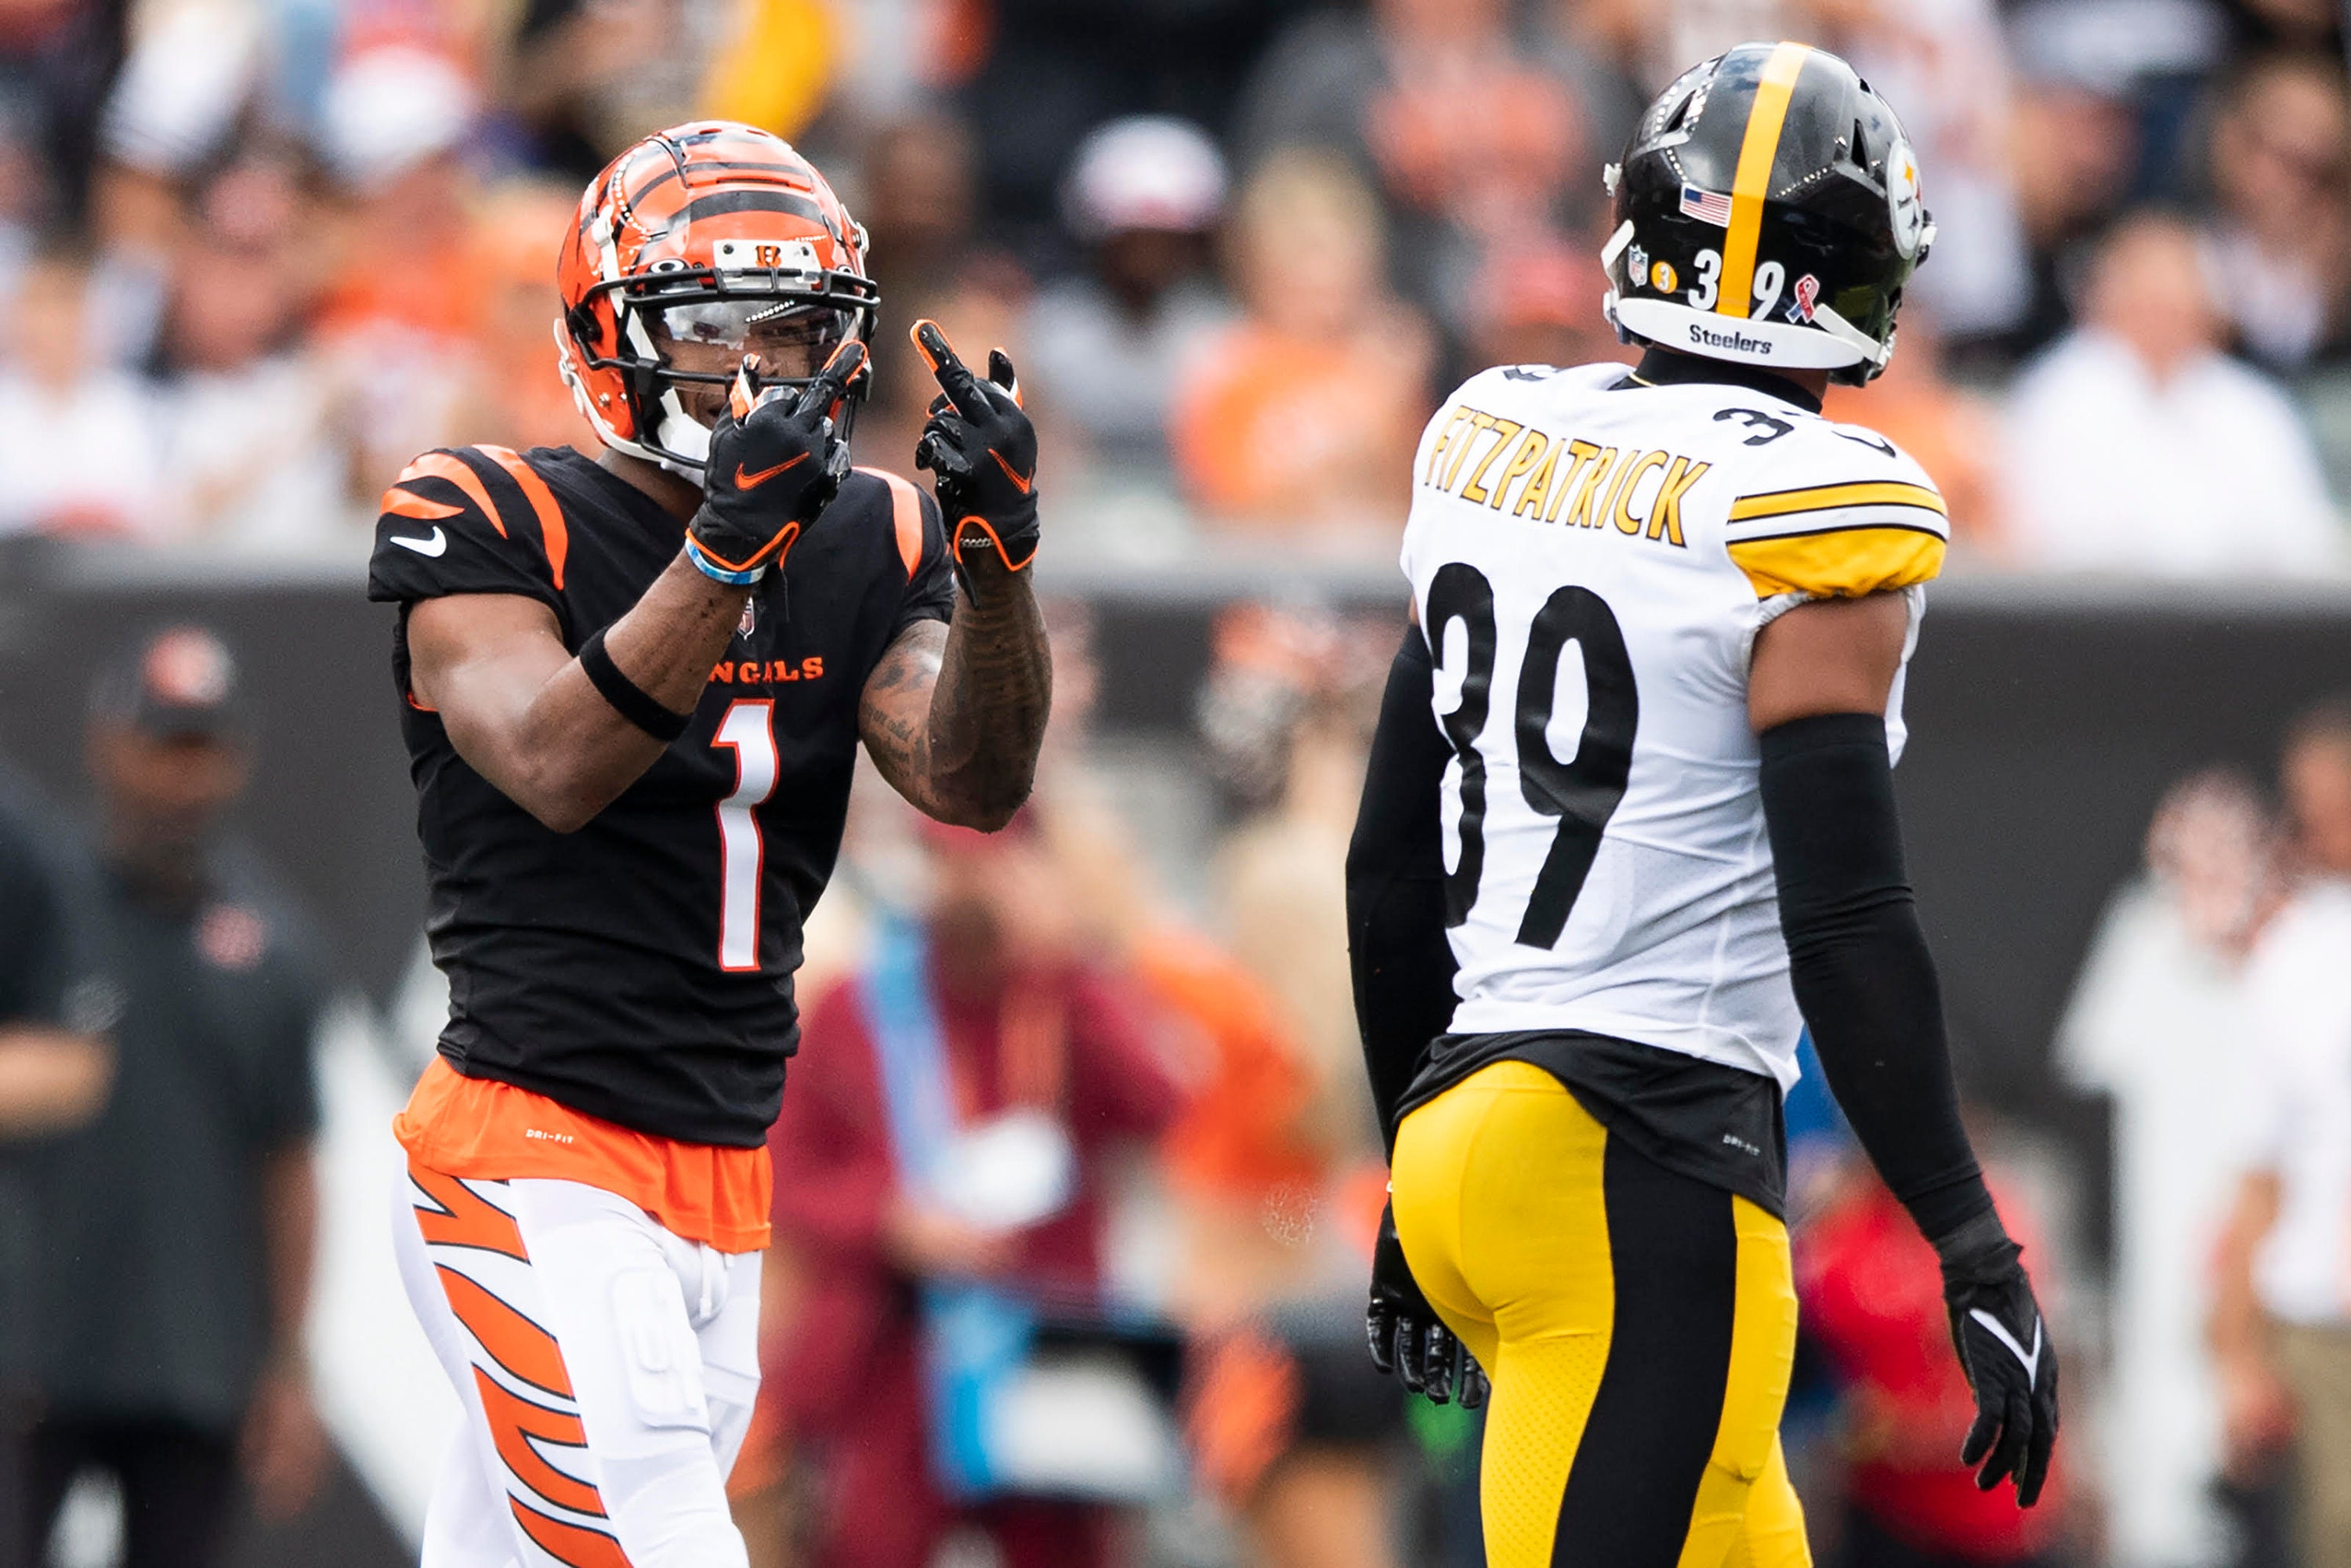 Ben Baby on X Great photo from emchinn of Bengals WR JaMarr Chase  expressing his displeasure with Steelers S Minkah Fitzpatrick ht  aarondoster httpstcosfPnPy7VoN  X